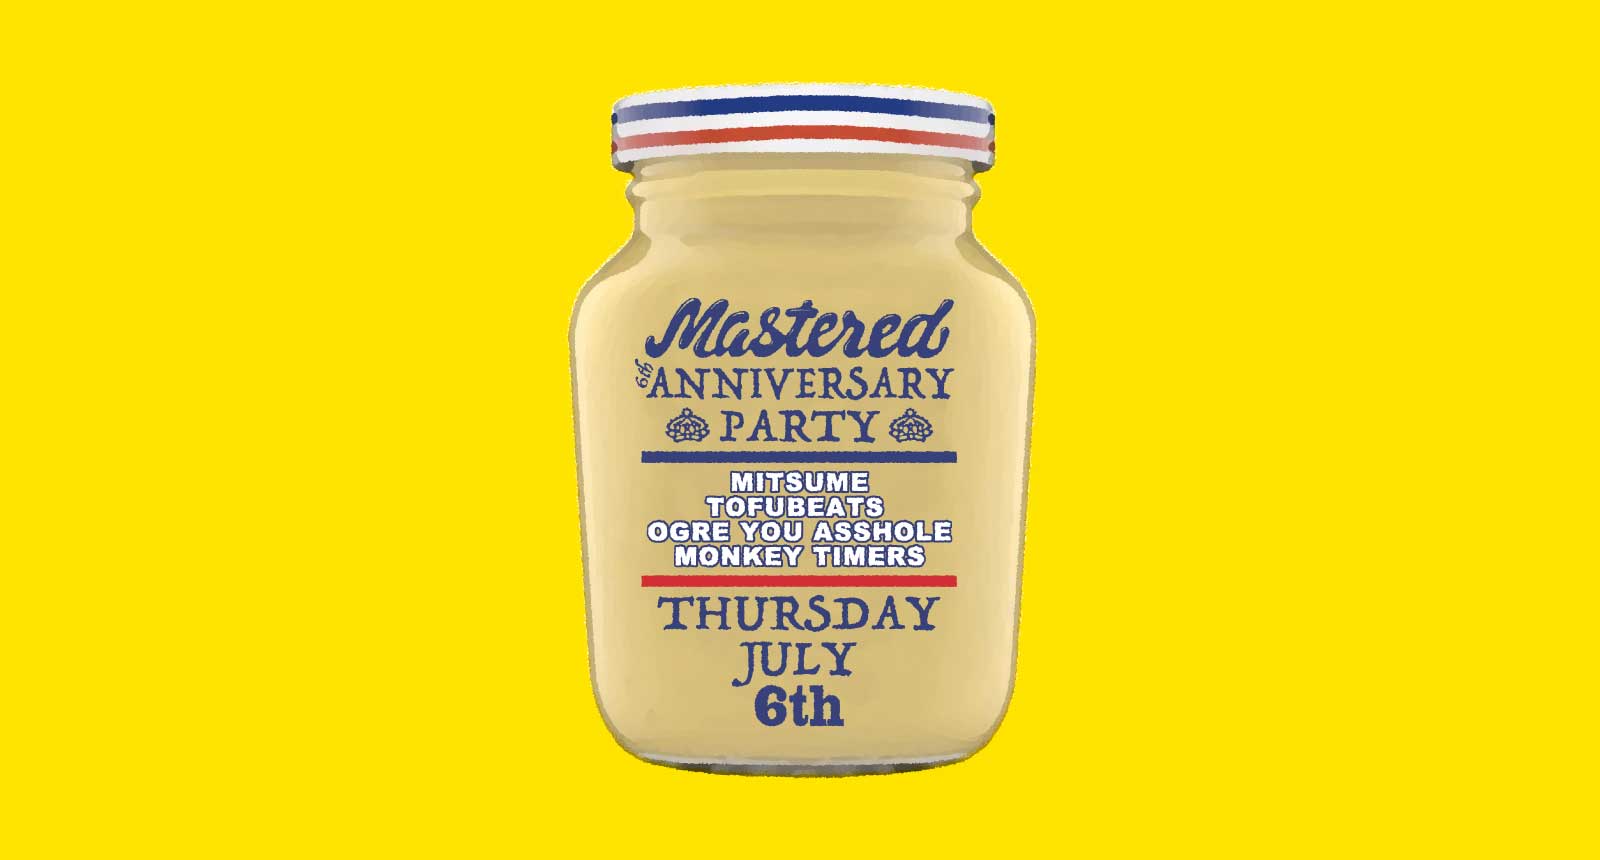 Mastered 6th Anniversary Party